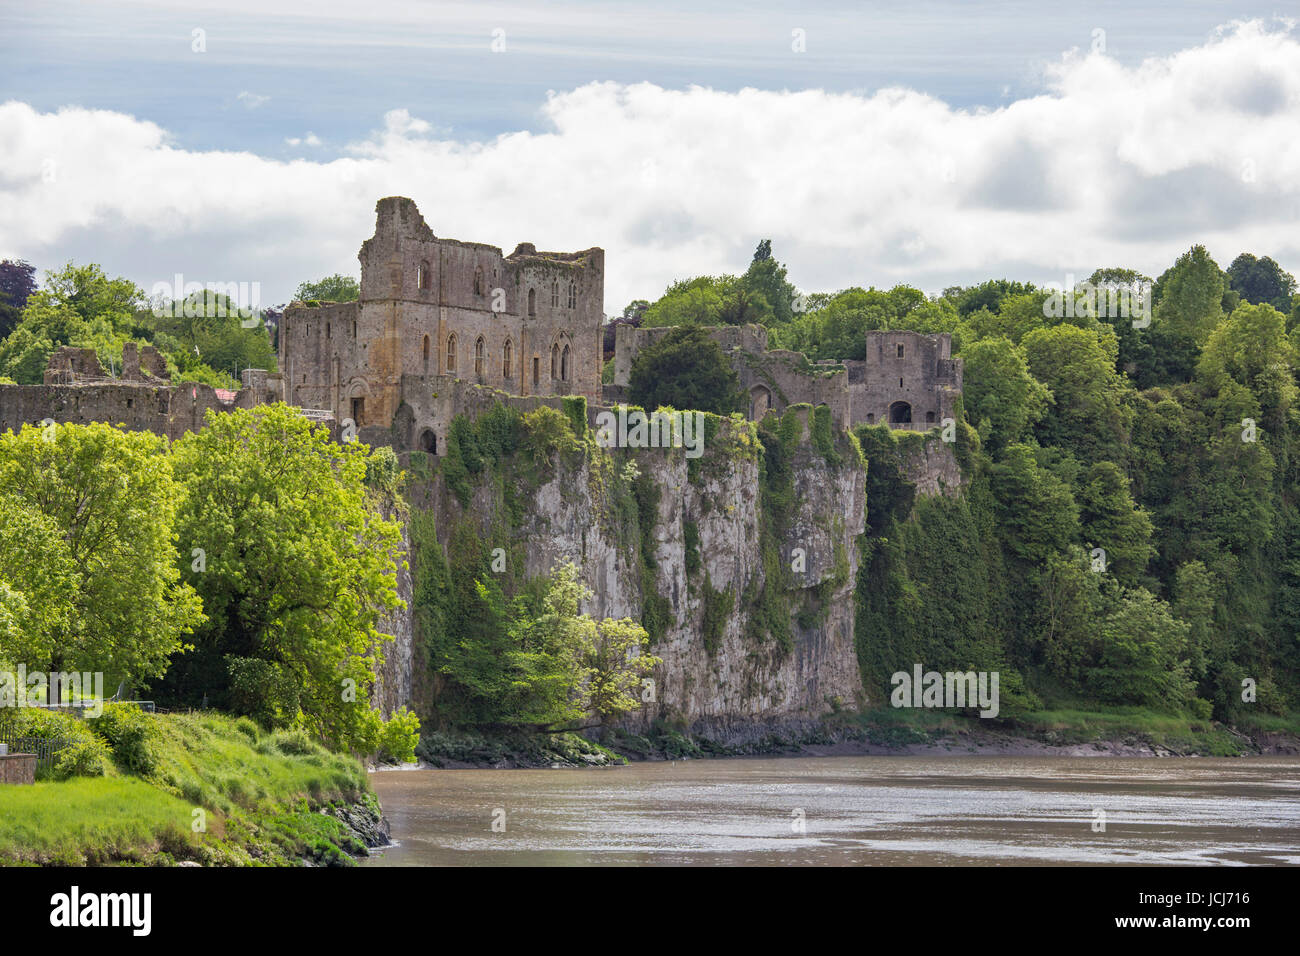 Historic Chepstow Castle, Chepstow, Monmouthshire, Wales, UK Stock Photo